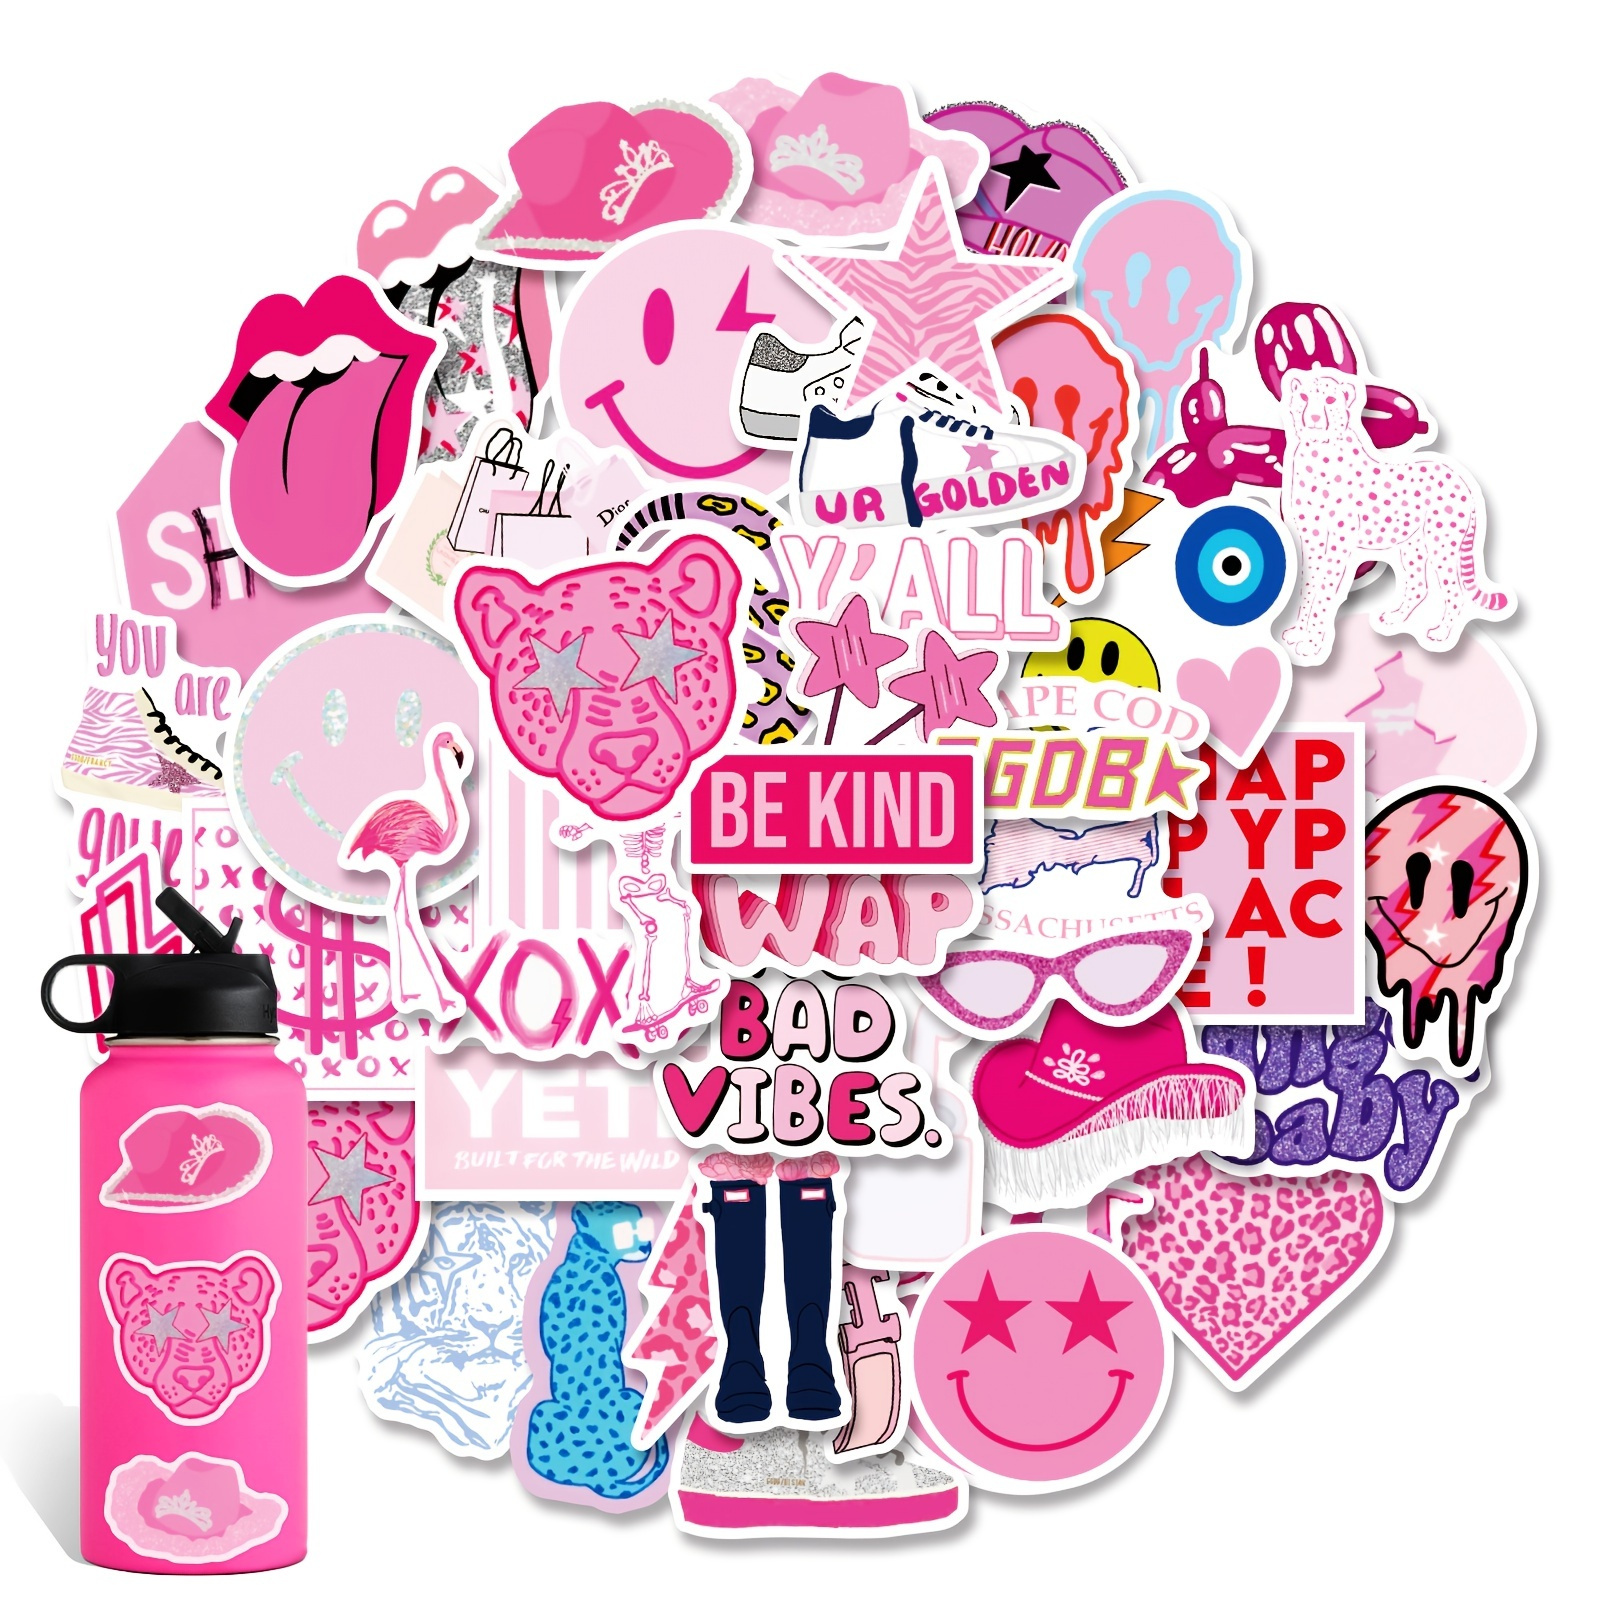 Y2k Aesthetic Stickers,52PCS- Cyber 2000s Fashion Sticker for Girls,  Waterproof Laptop Stickers Decals for Water Bottle, , Cute Vsco Stickers  for